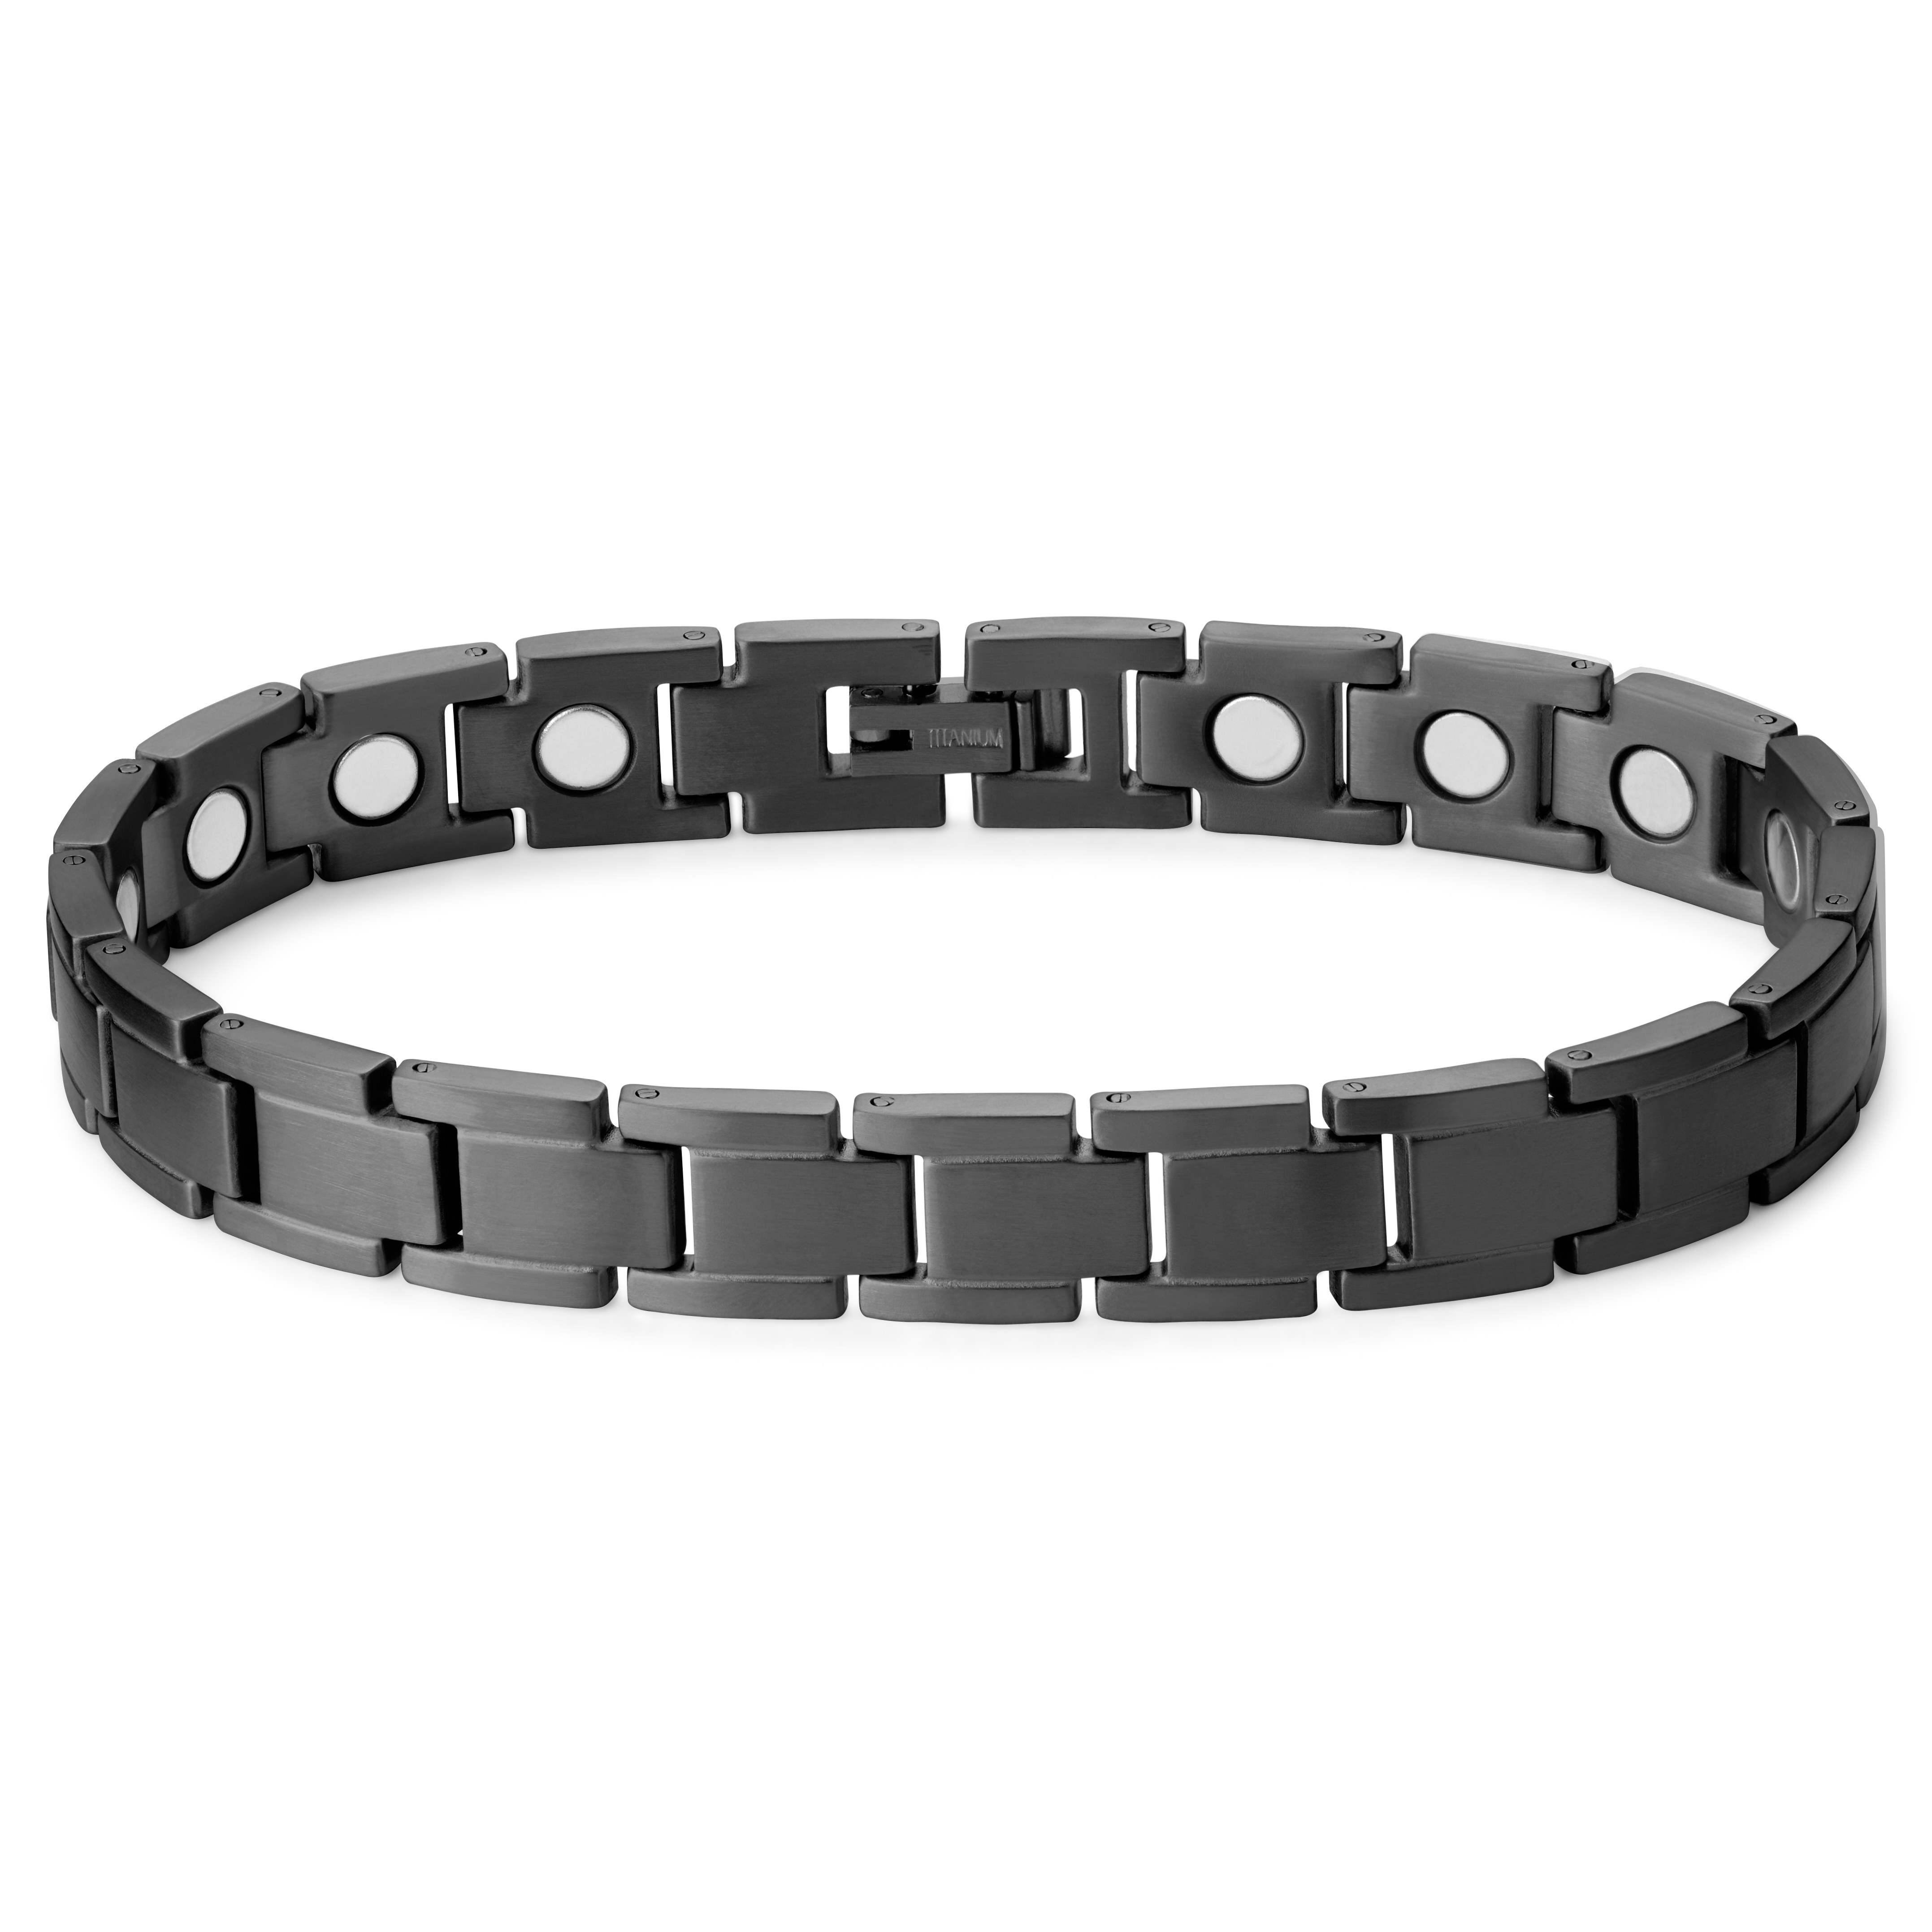 Brown Leather and Stainless Steel Brushed 8.25-inch Bracelet - 1121GC |  JTV.com